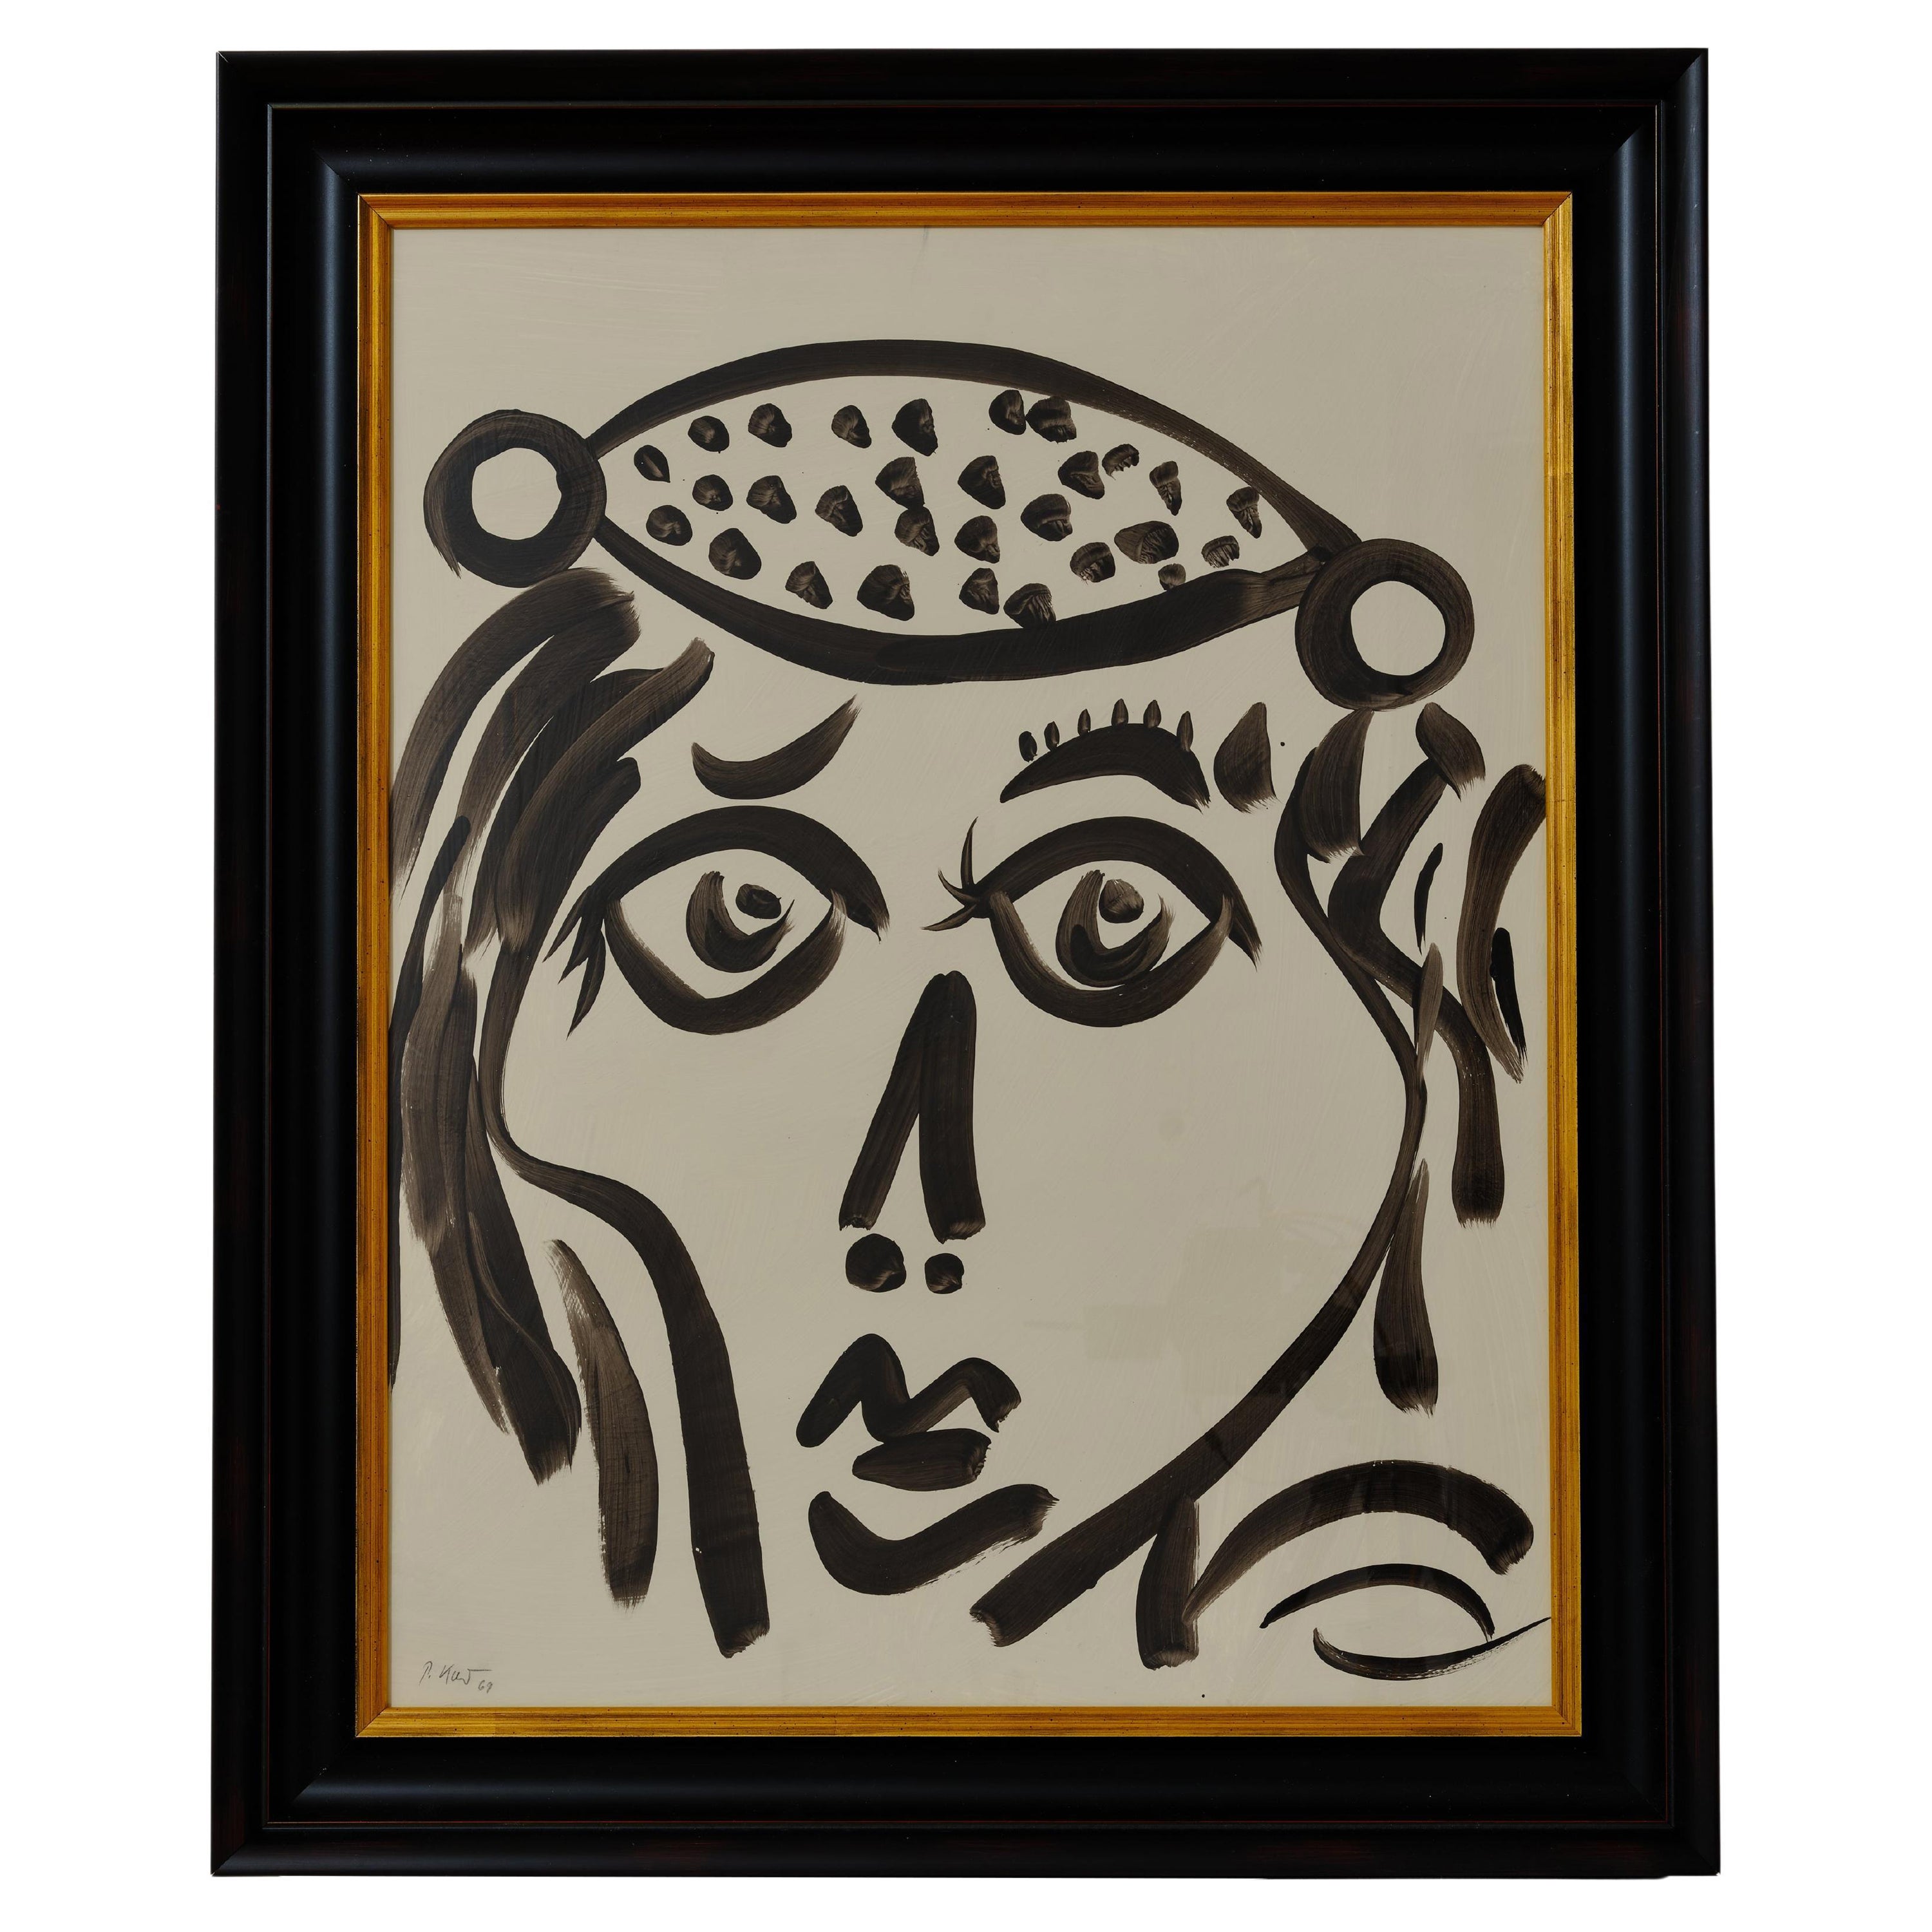 Painting by Peter Keil, C 1979, Framed, Black & White, "Lady with a Hat"